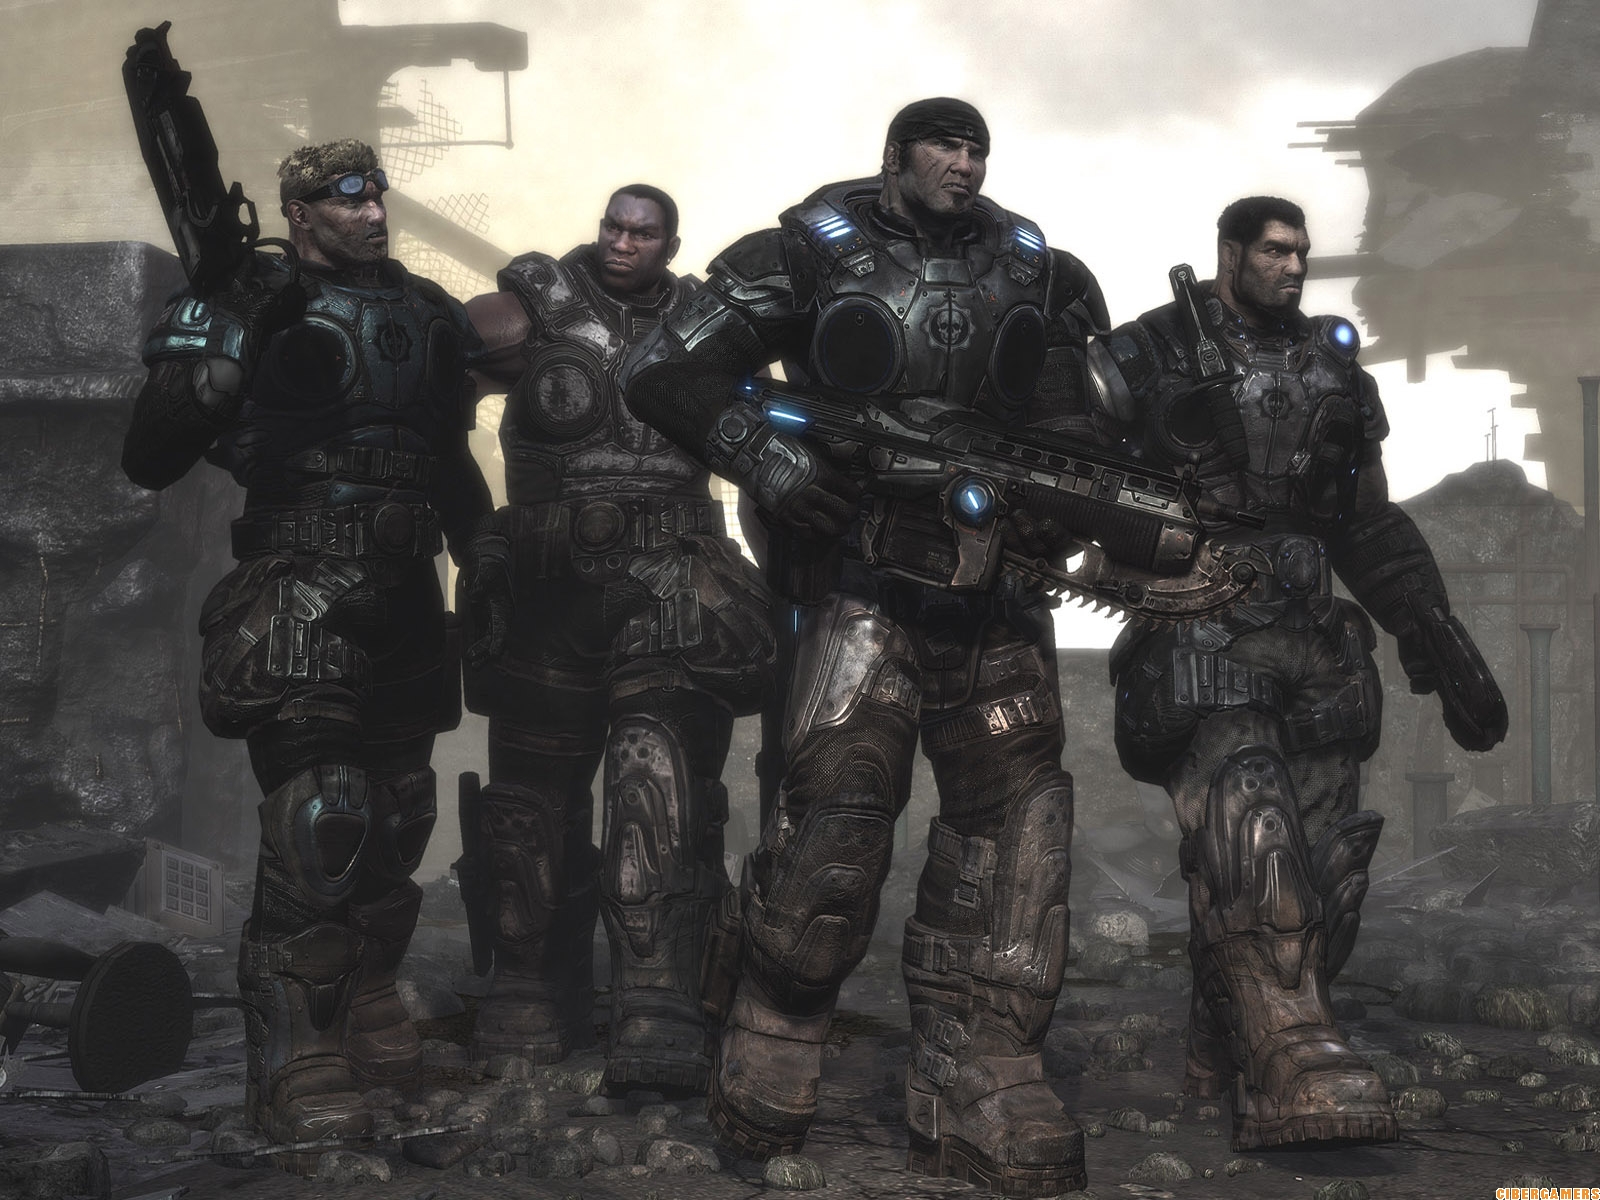 The only thing missing in Gears of War 2 is a 